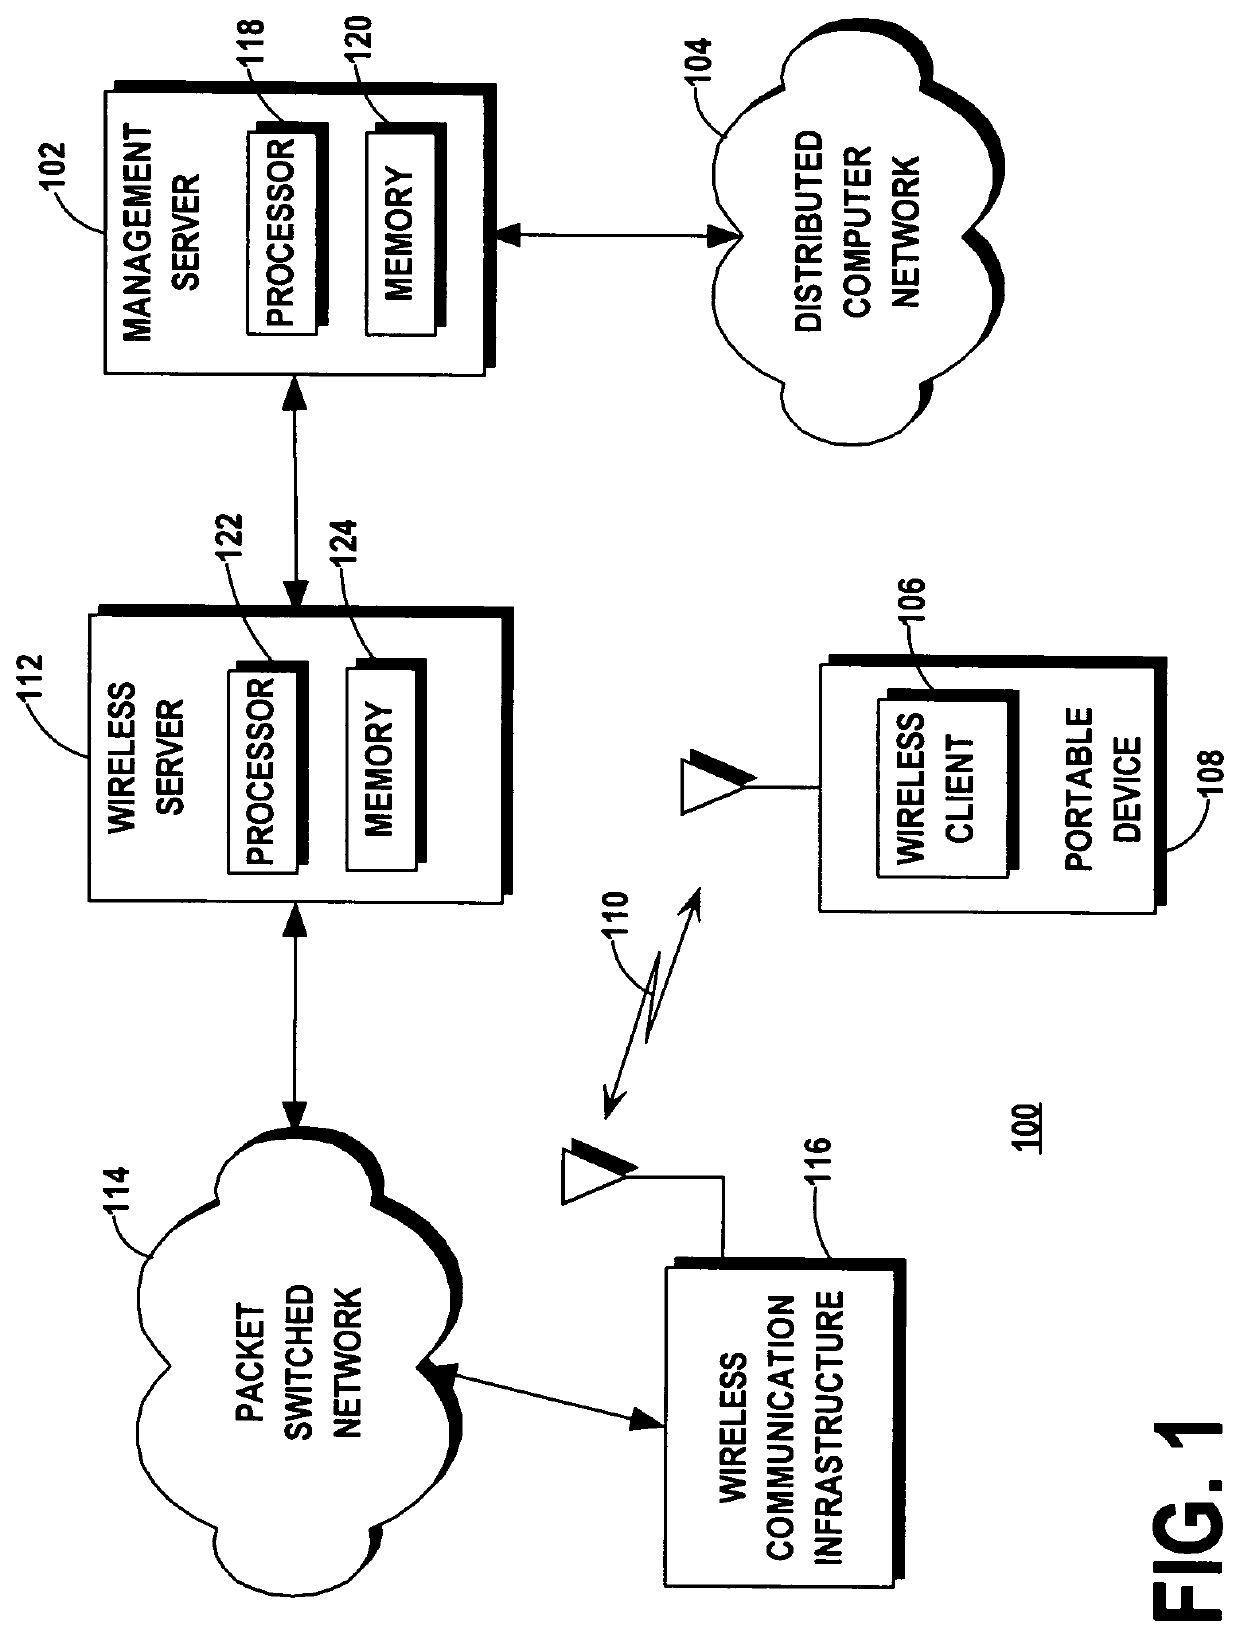 Apparatus, system, and method for wireless management of a distributed computer system